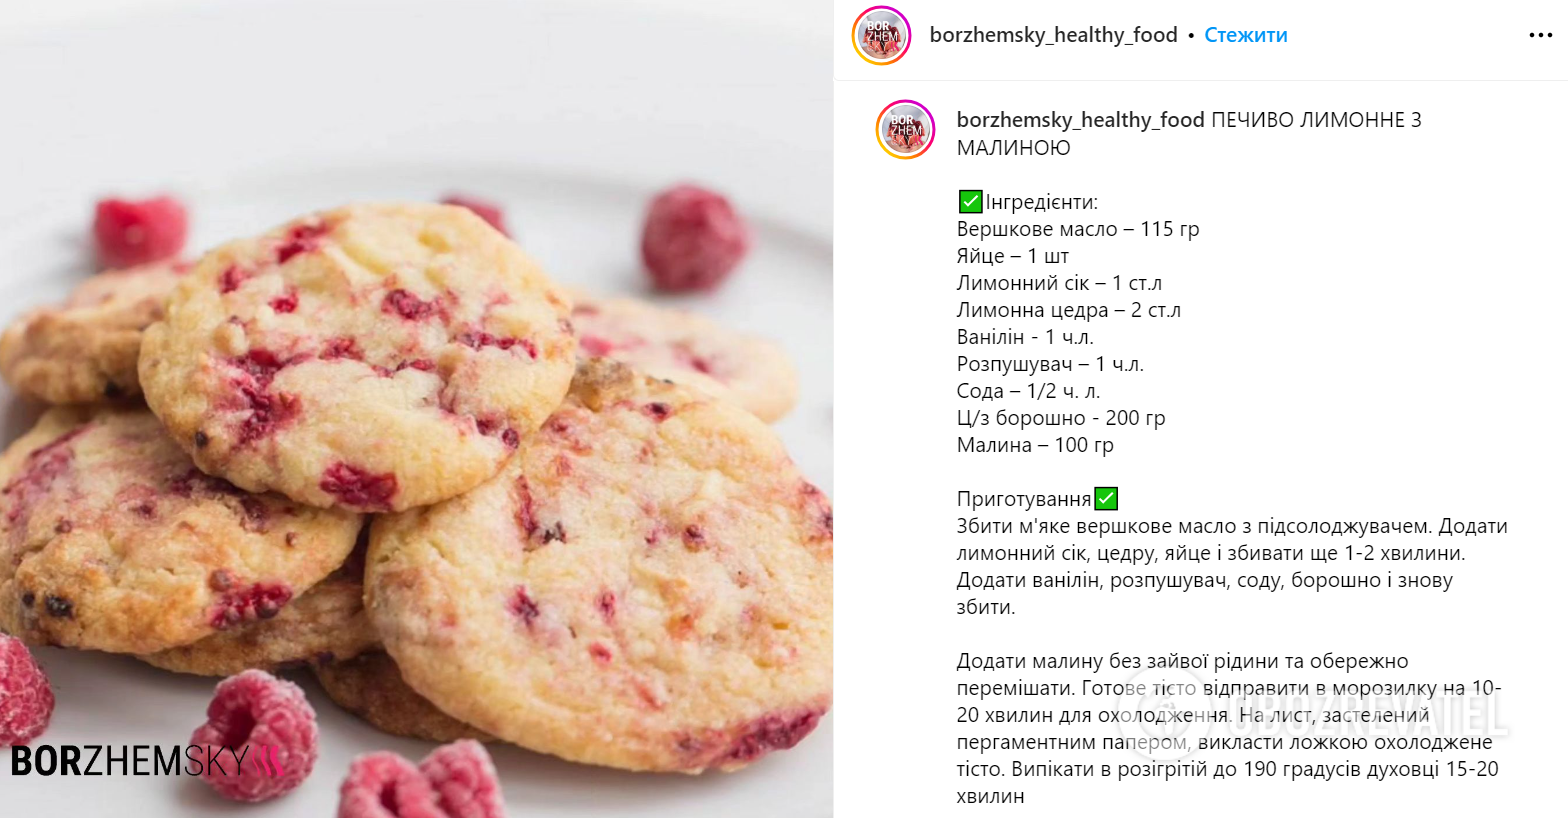 Delicious raspberry cookies: be sure to make a dessert this summer